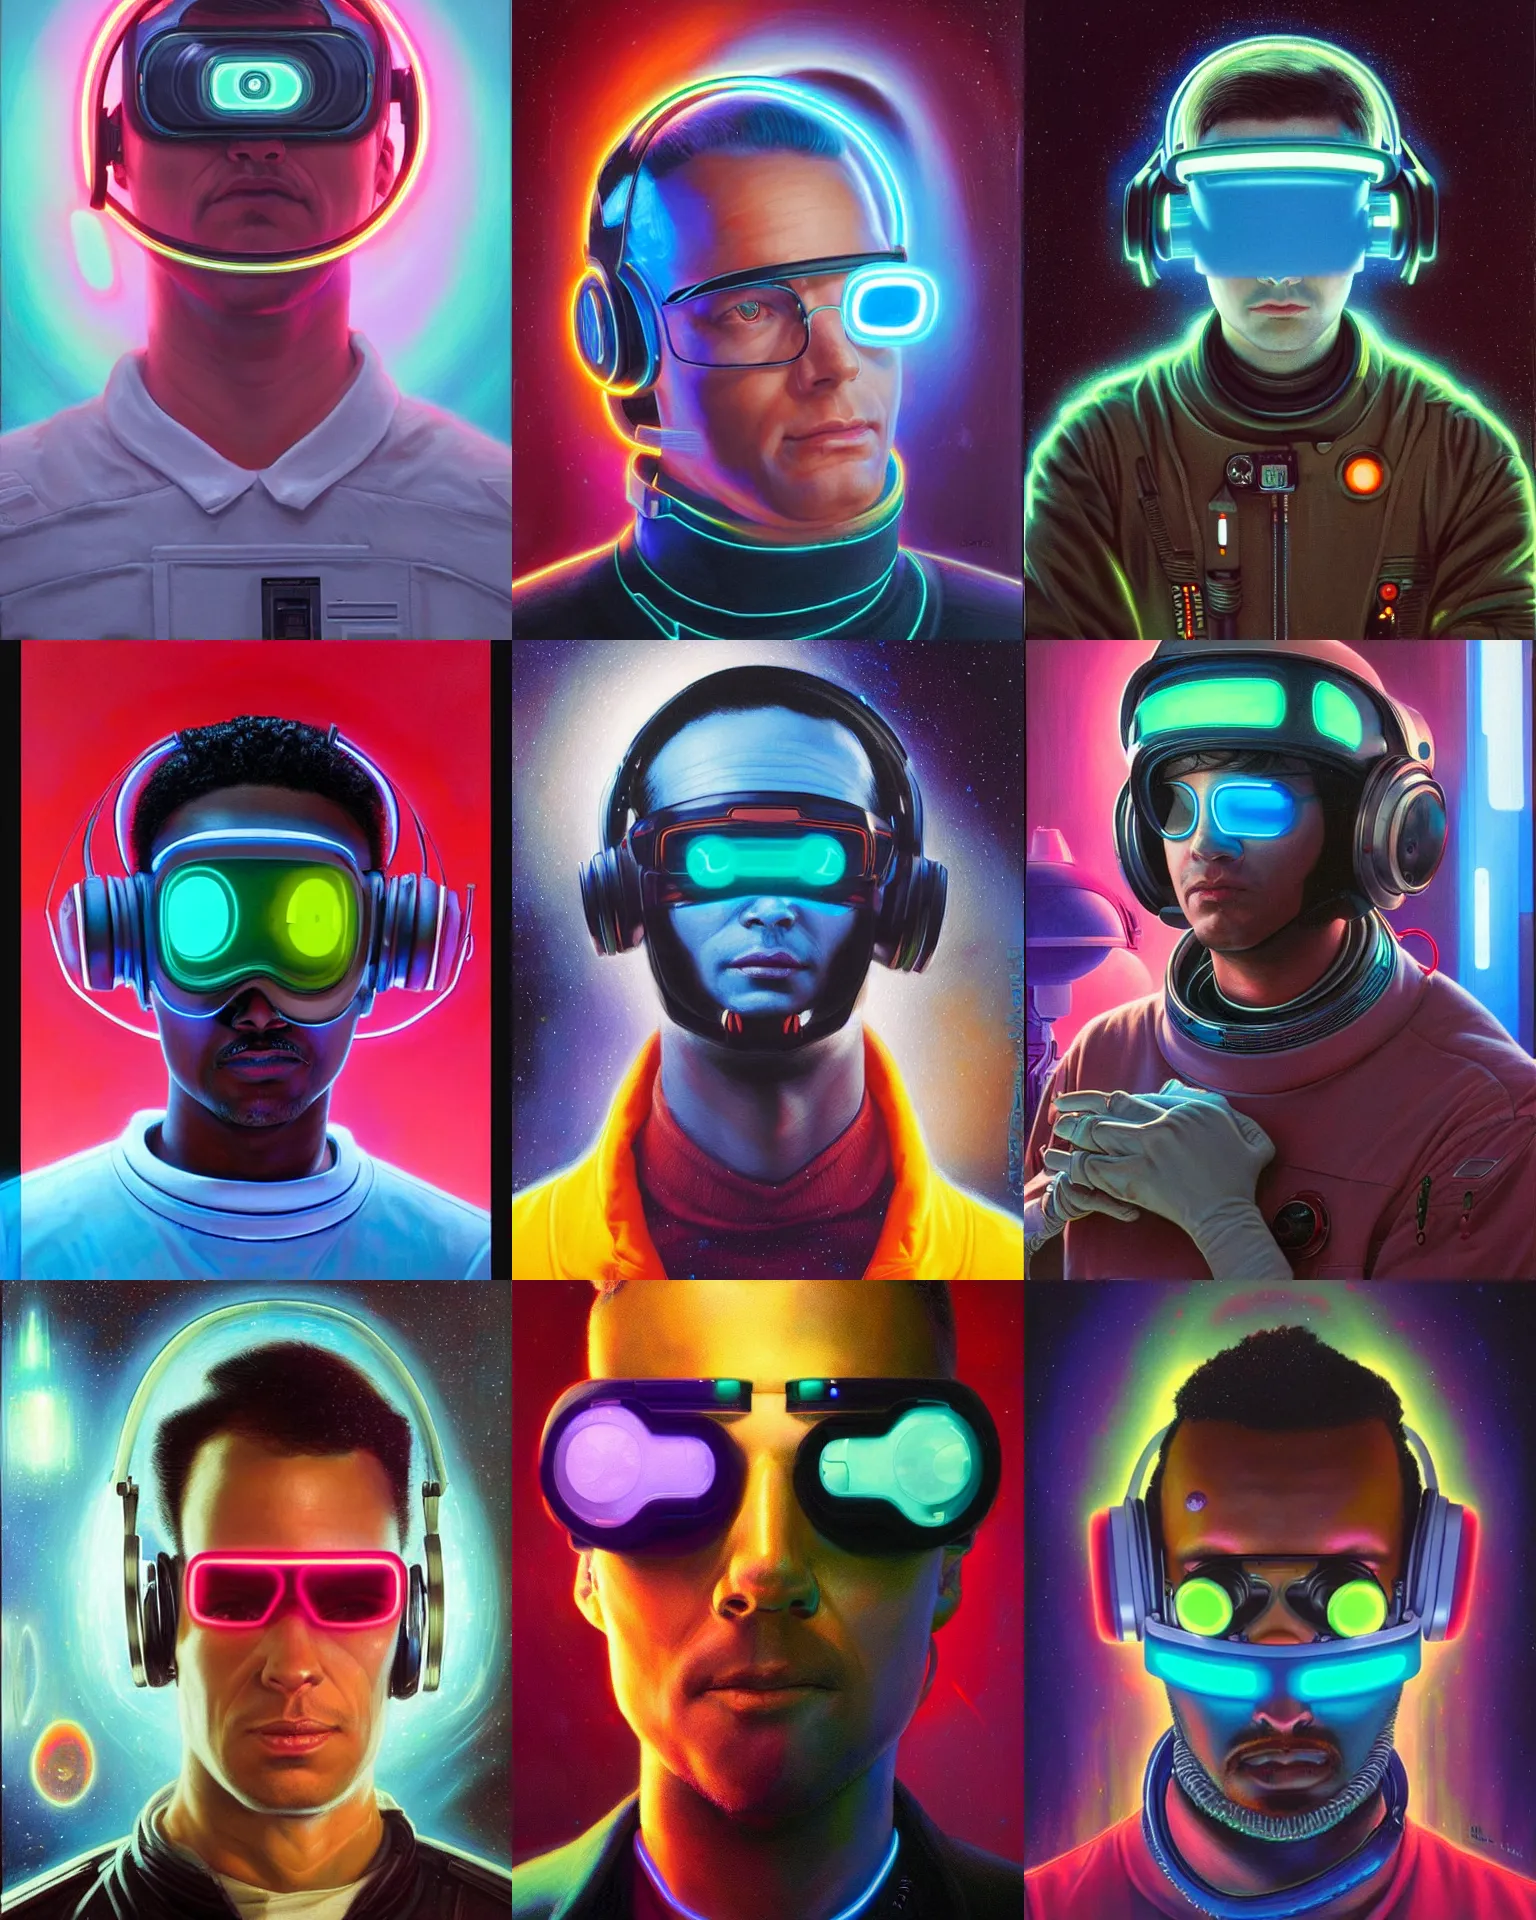 Prompt: neon cyberpunk programmer with glowing geordi cyclops visor over eyes and sleek headphones headshot desaturated profile!!!! portrait painting by donato giancola, dean cornwall, rhads, tom whalen, alex grey astronaut fashion photography